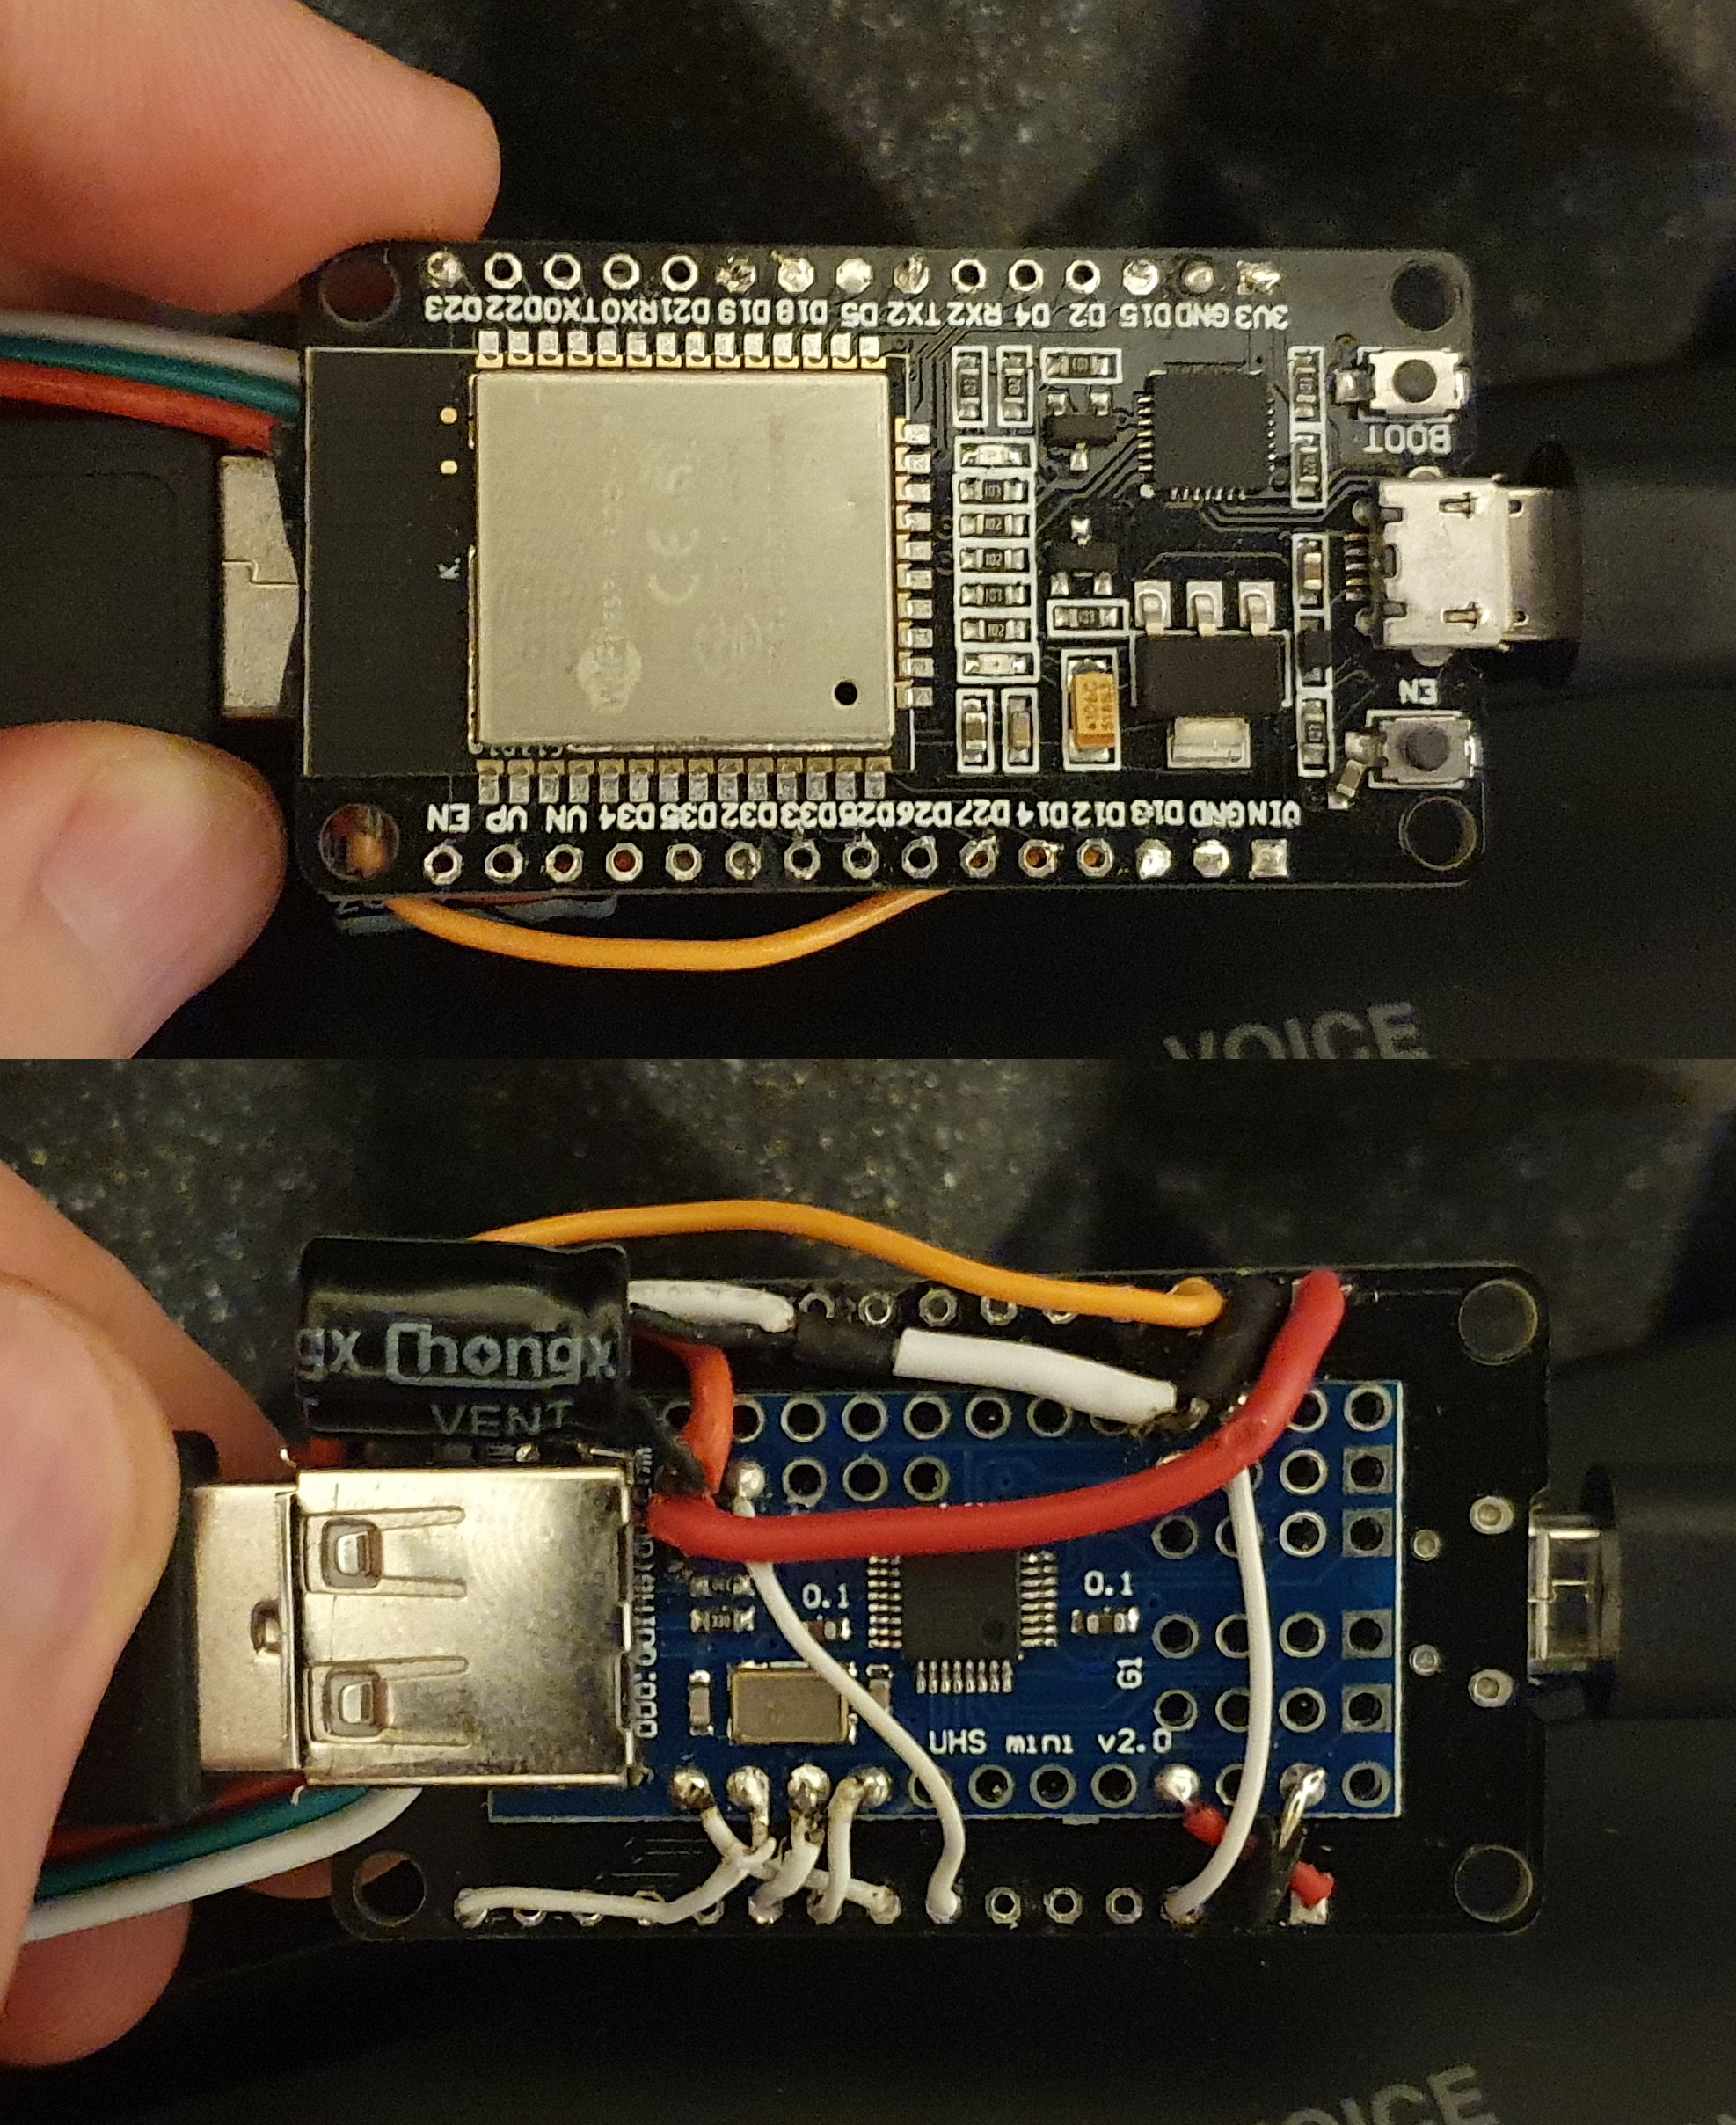 ESP32 board with USB-host attached on the back